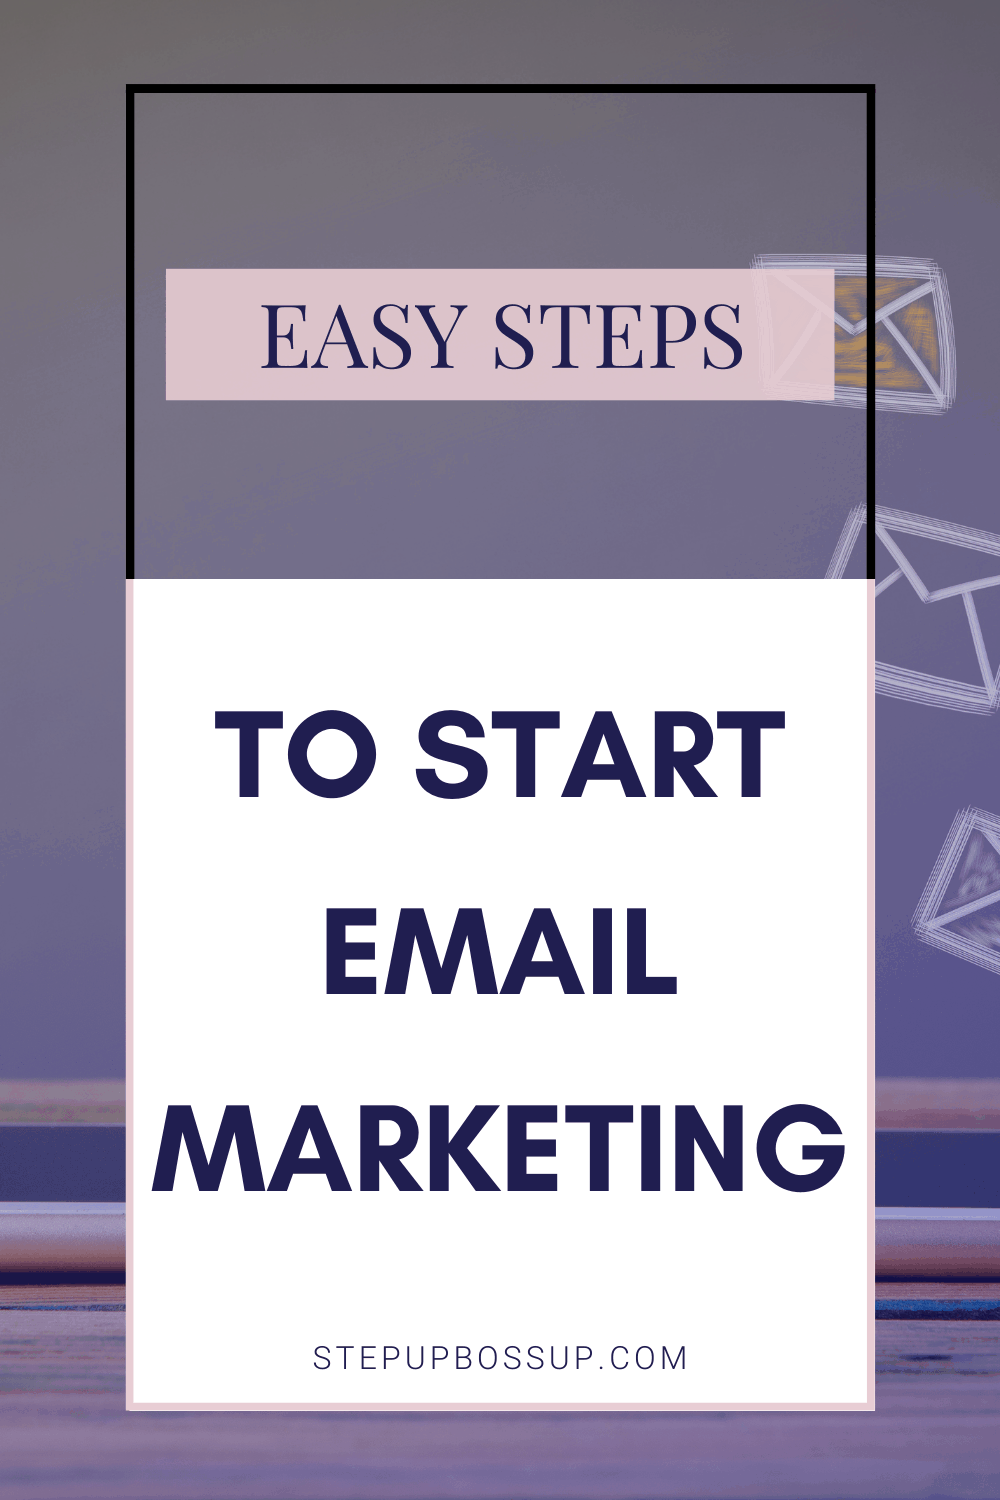 Email Marketing For Beginners: What You Should Know - Step Up Boss Up ...